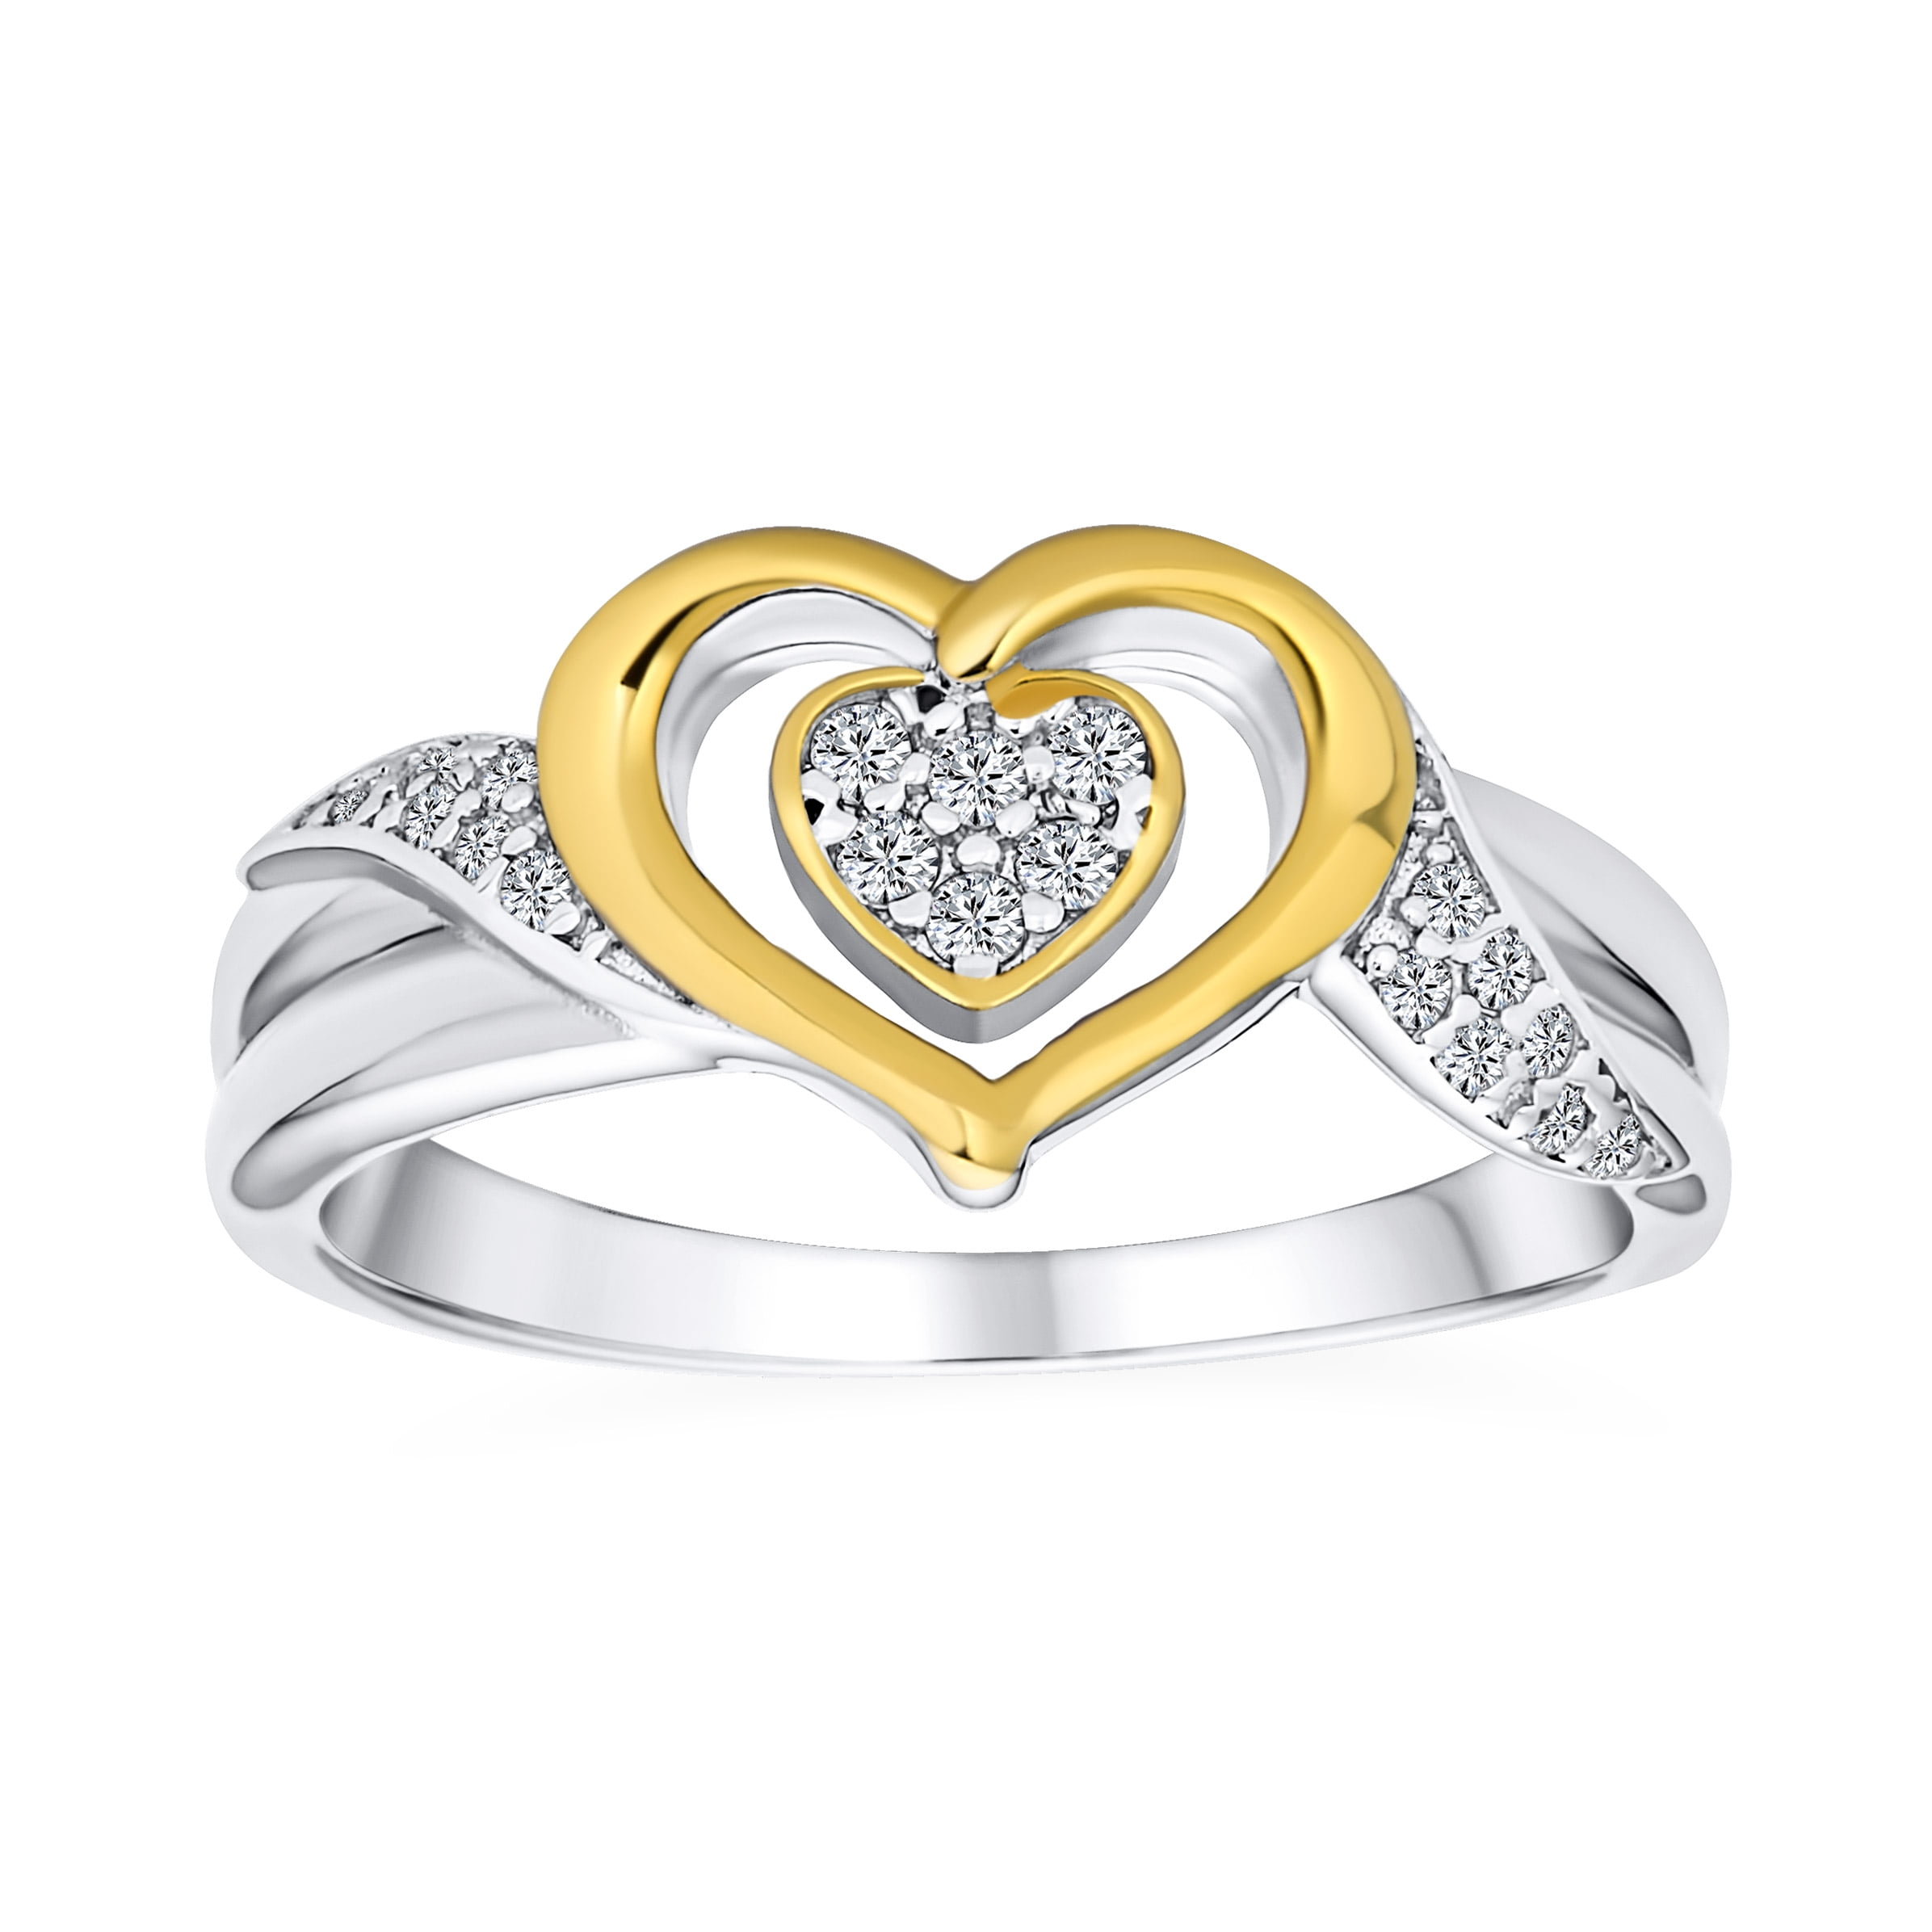 3 Hearts Fashion Ring in Yellow Gold Plated over .925 Sterling Silver - Vir  Jewels